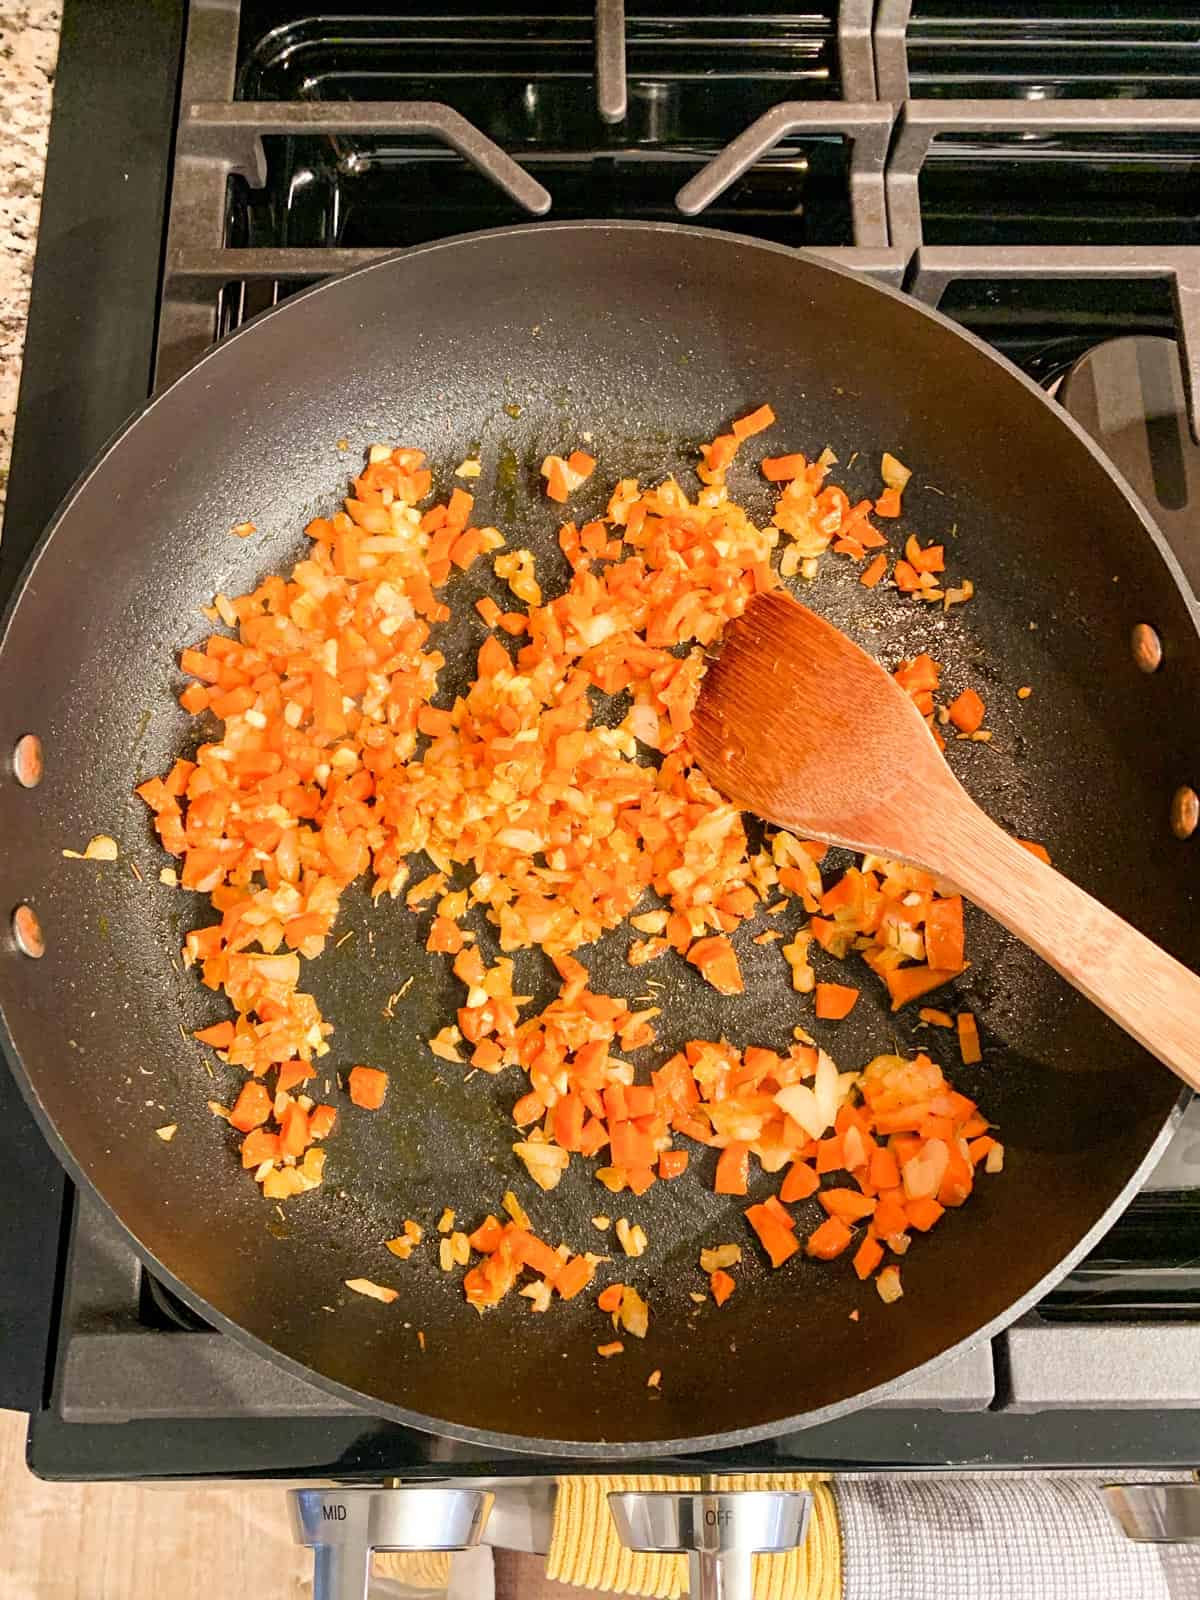 Diced onions and carrots sautéing in a skillet.